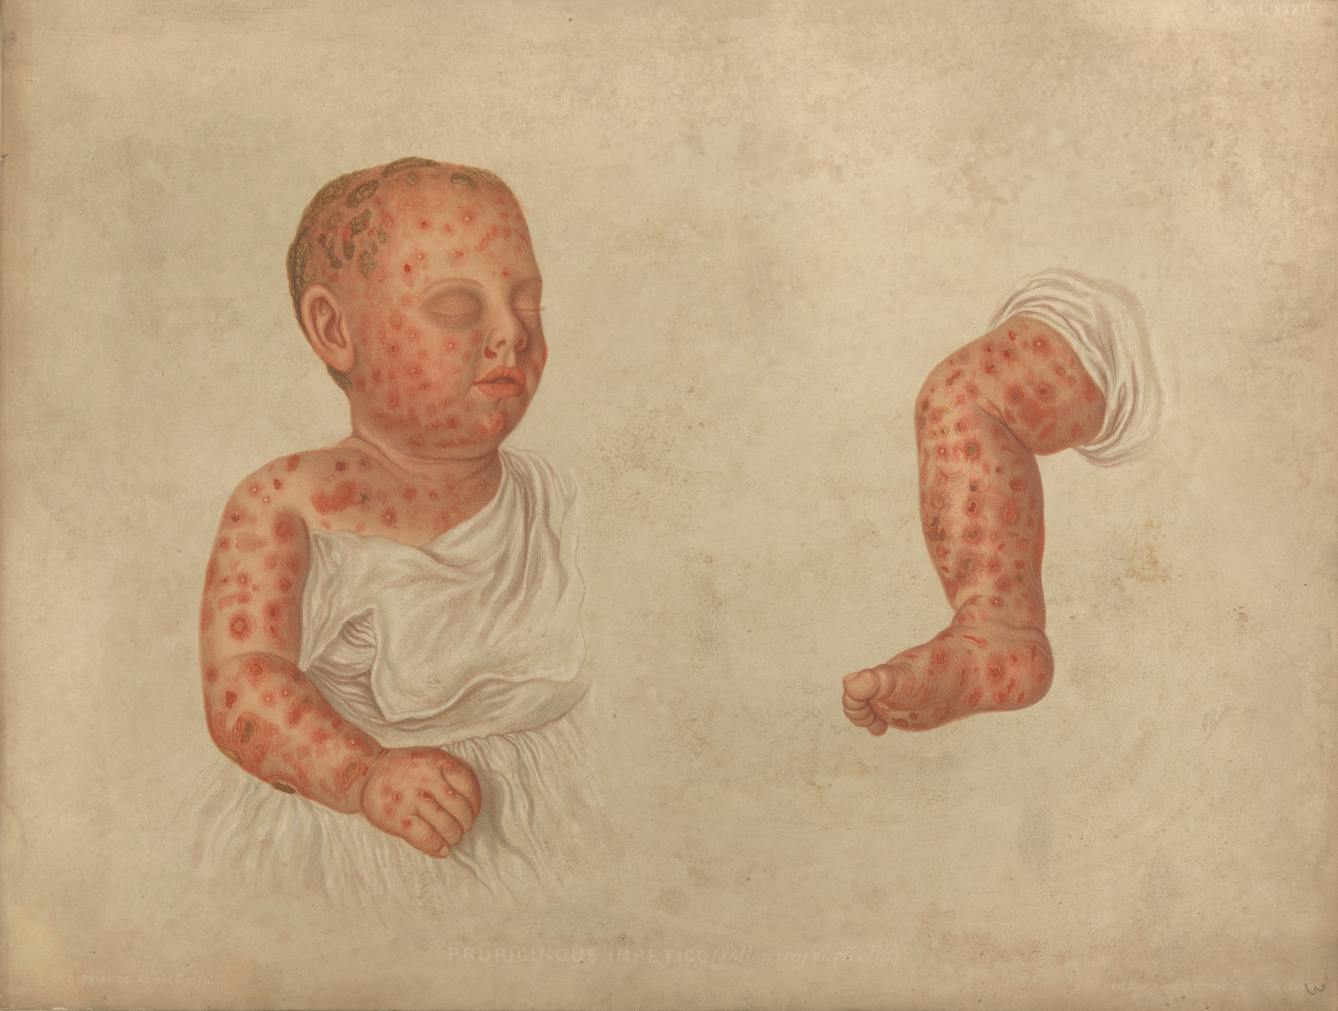 Watercolour of a baby with a skin condition. Red bumps are spread across the face and body. 